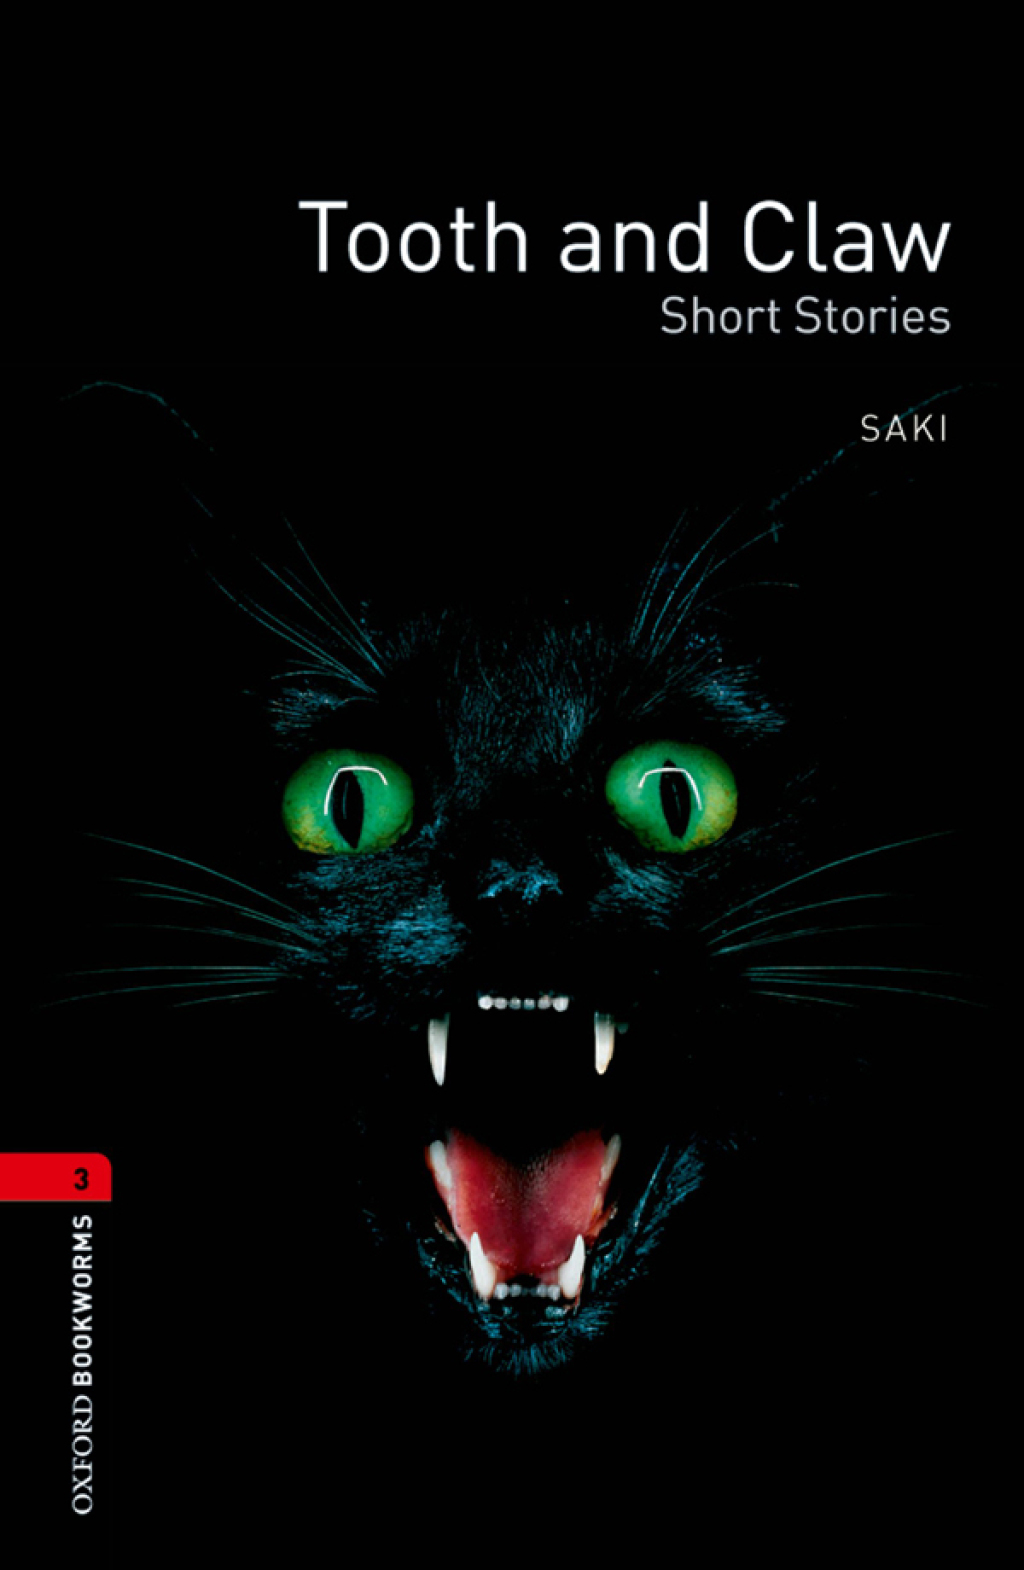 Tooth and Claw - Short Stories Level 3 Oxford Bookworms Library - 3rd Edition (eBook Rental)